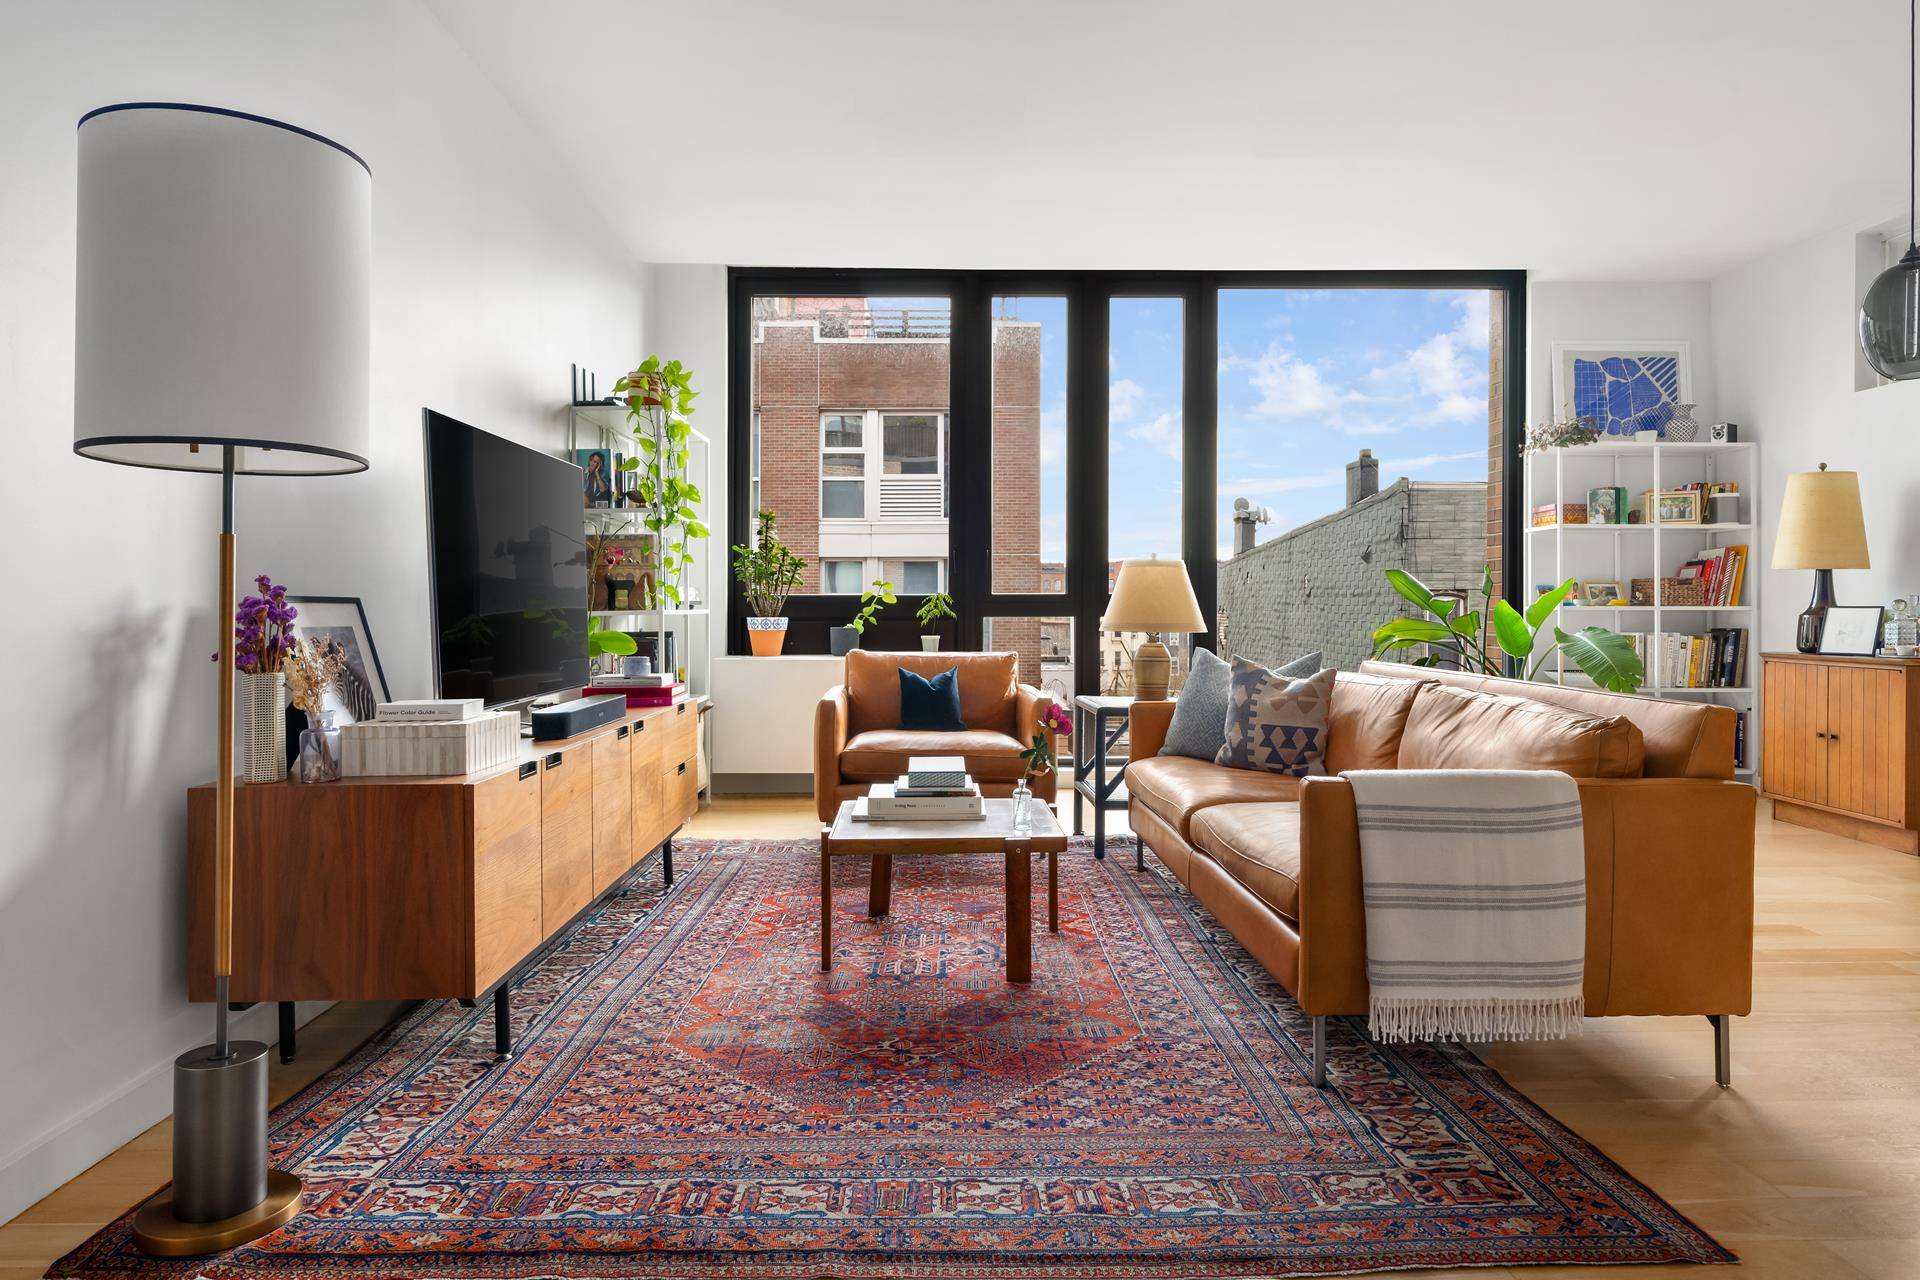 Residence 5G at 70 Berry Street is the quintessential Williamsburg 1 bedroom ?